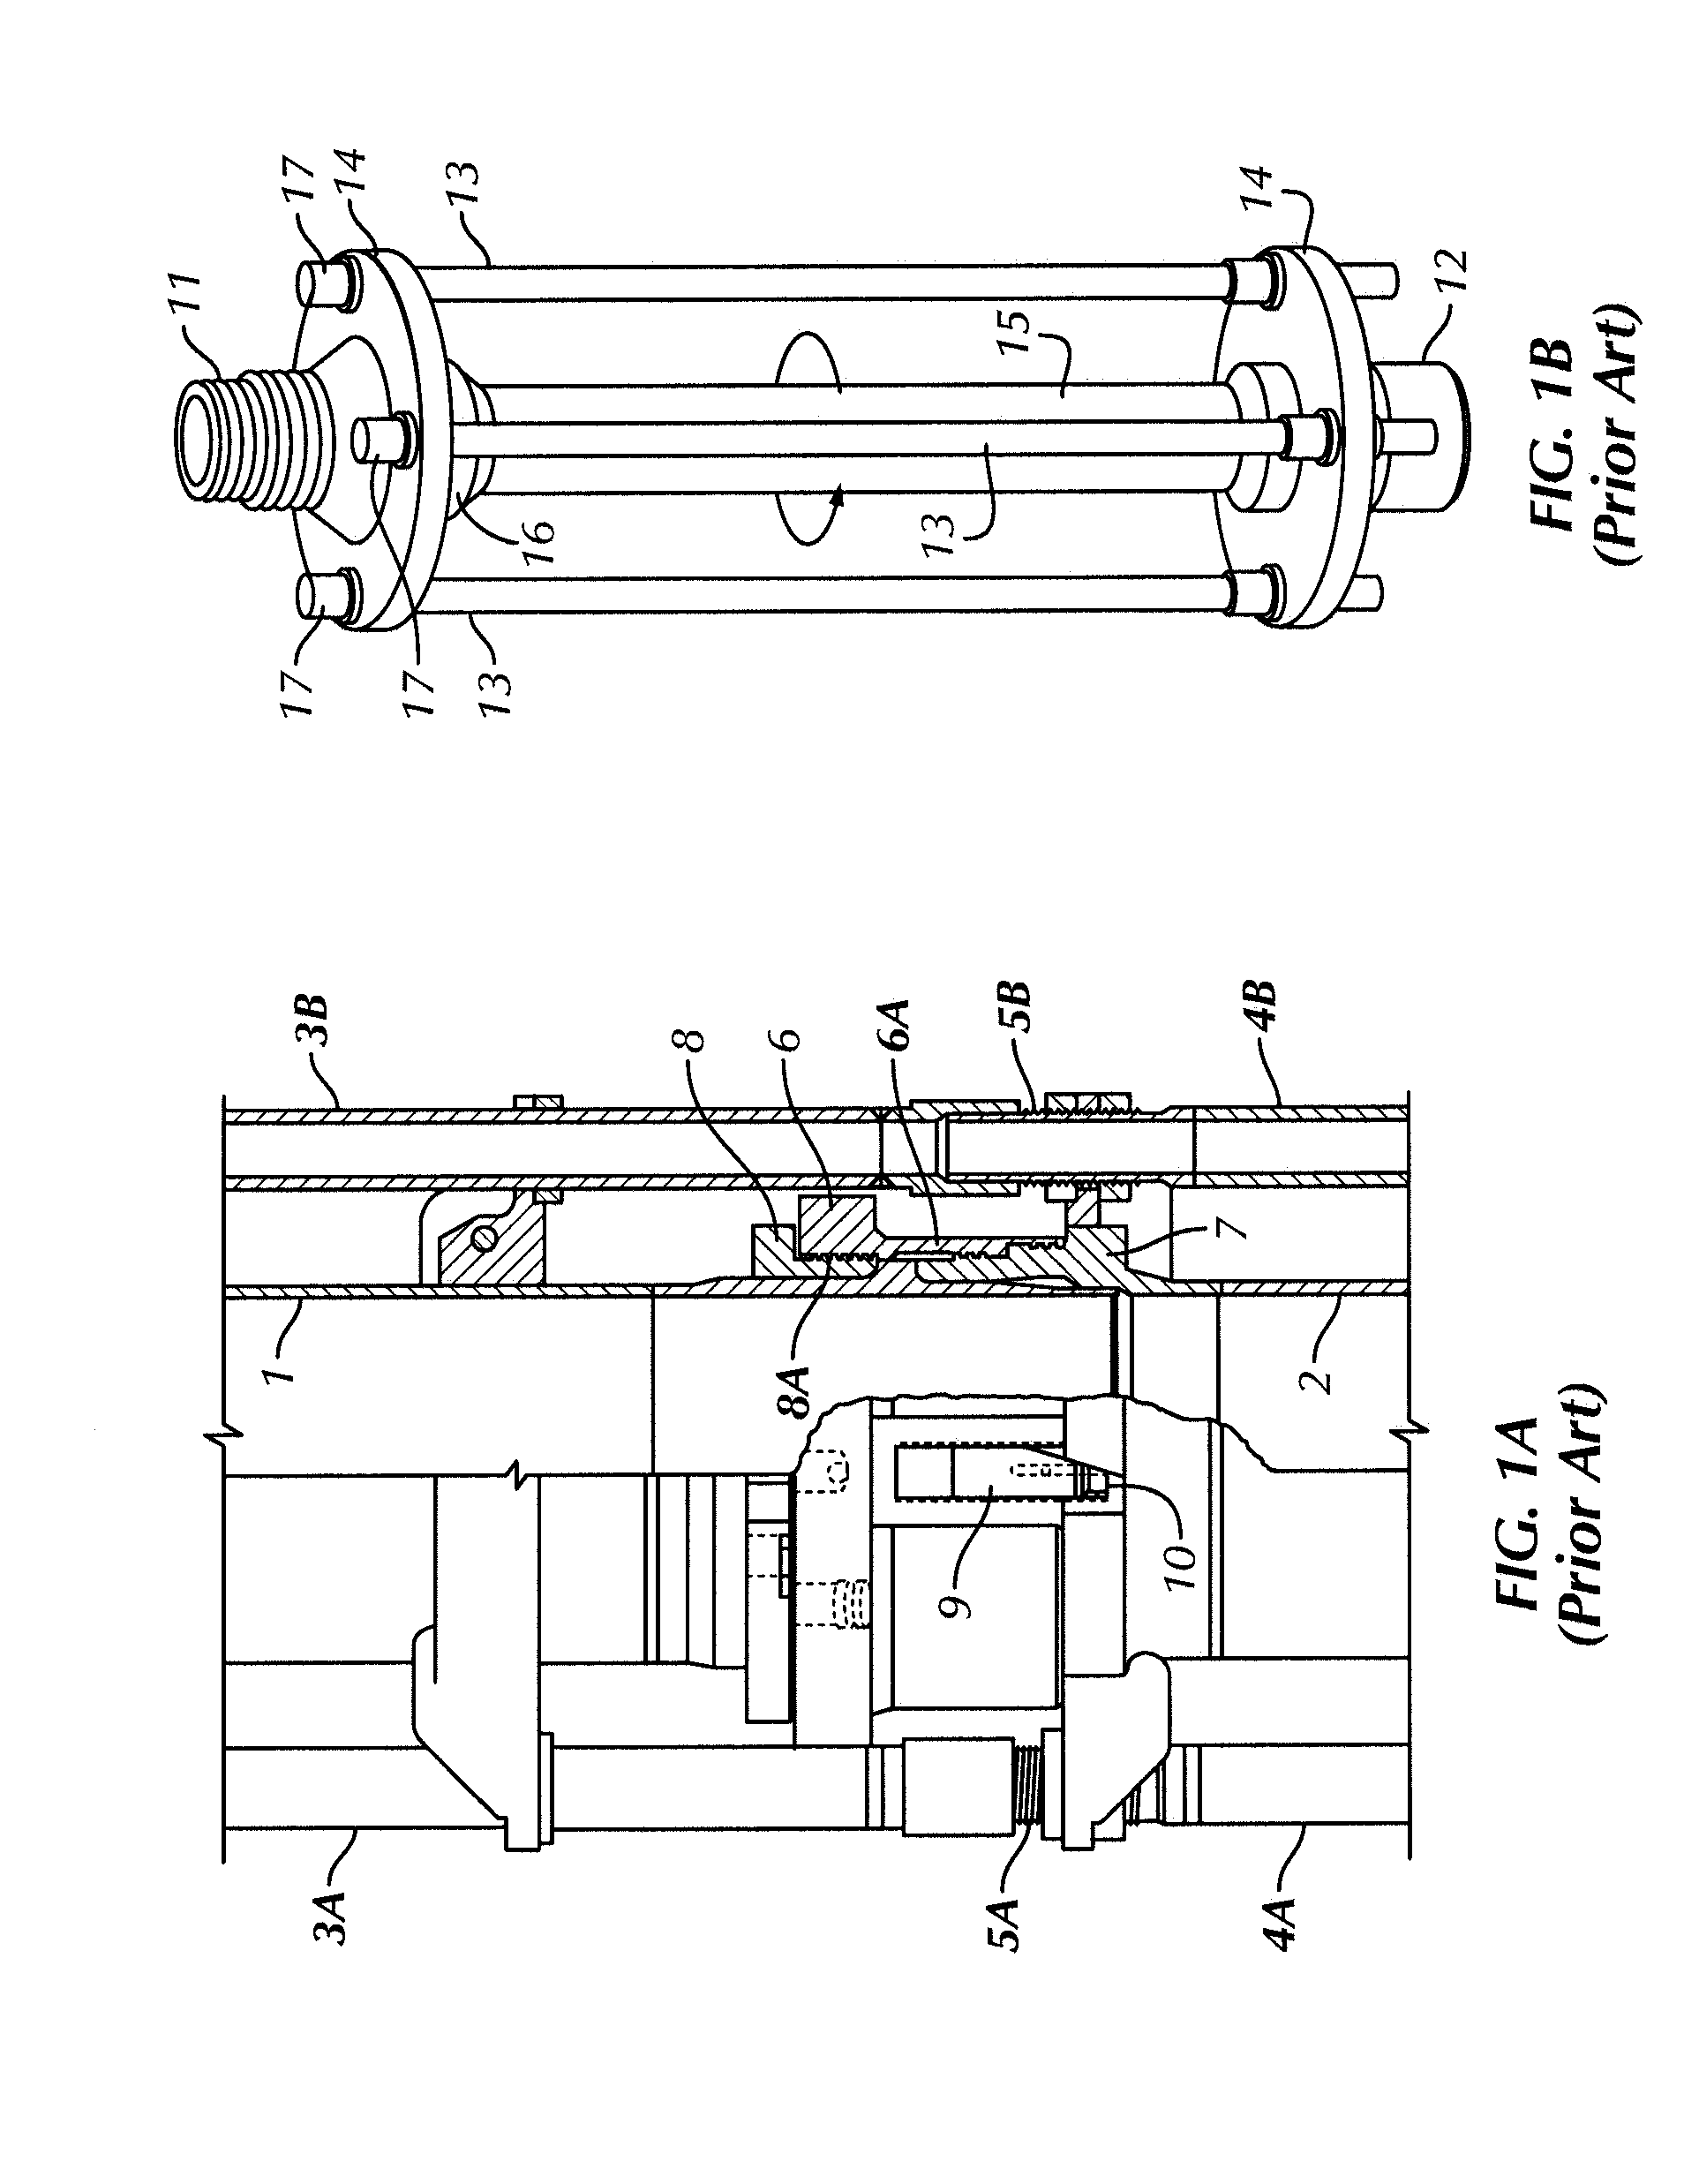 Marine drilling riser connector with removable shear elements